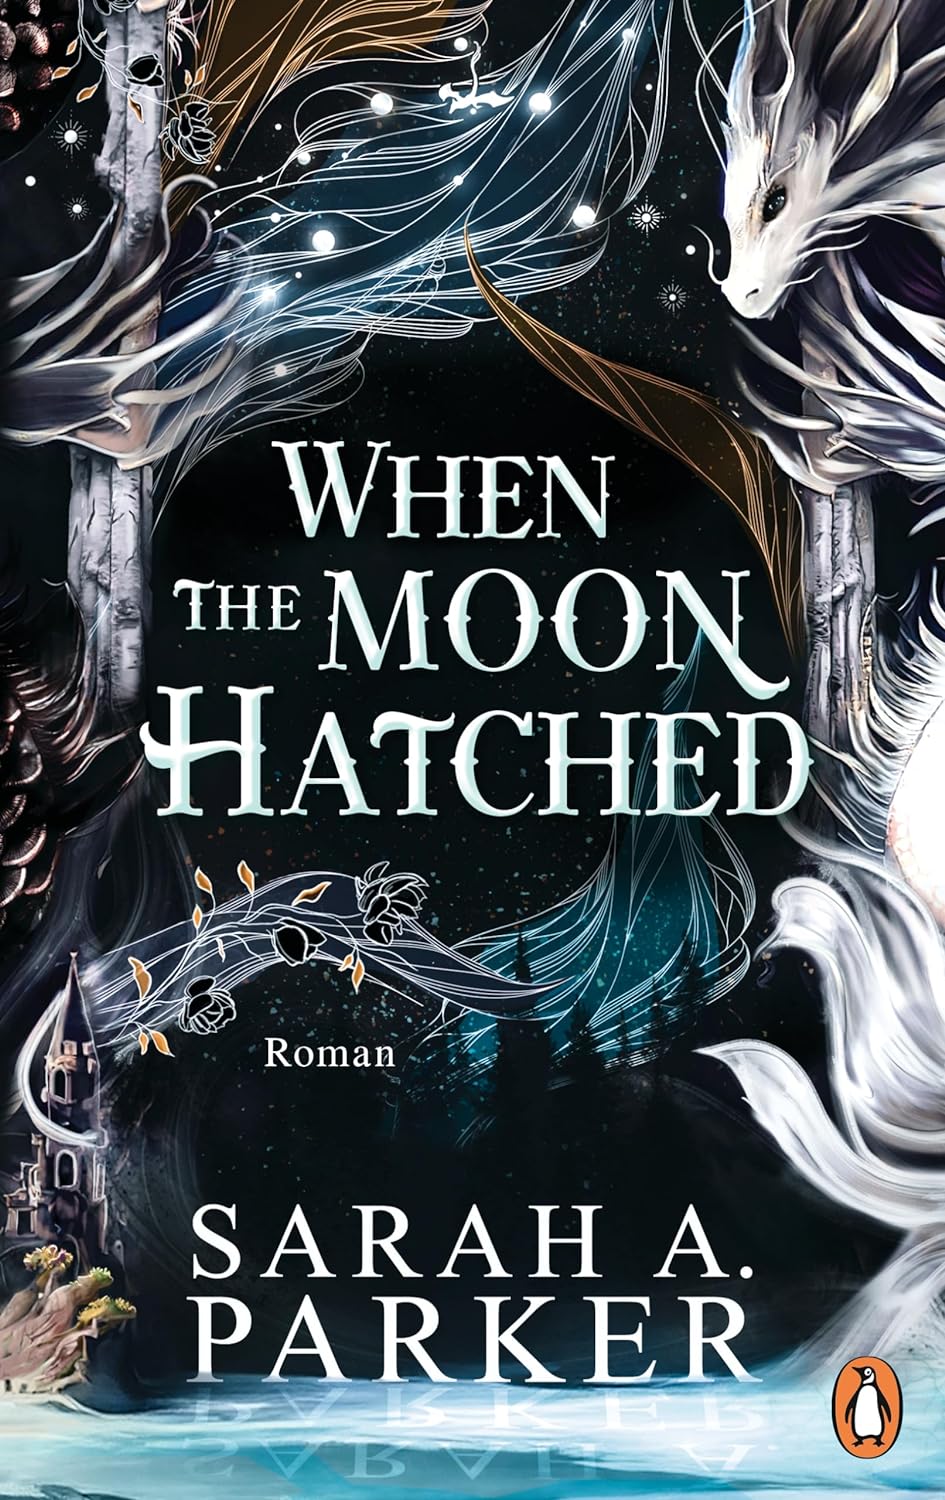 Sarah A. Parker - When The Moon Hatched